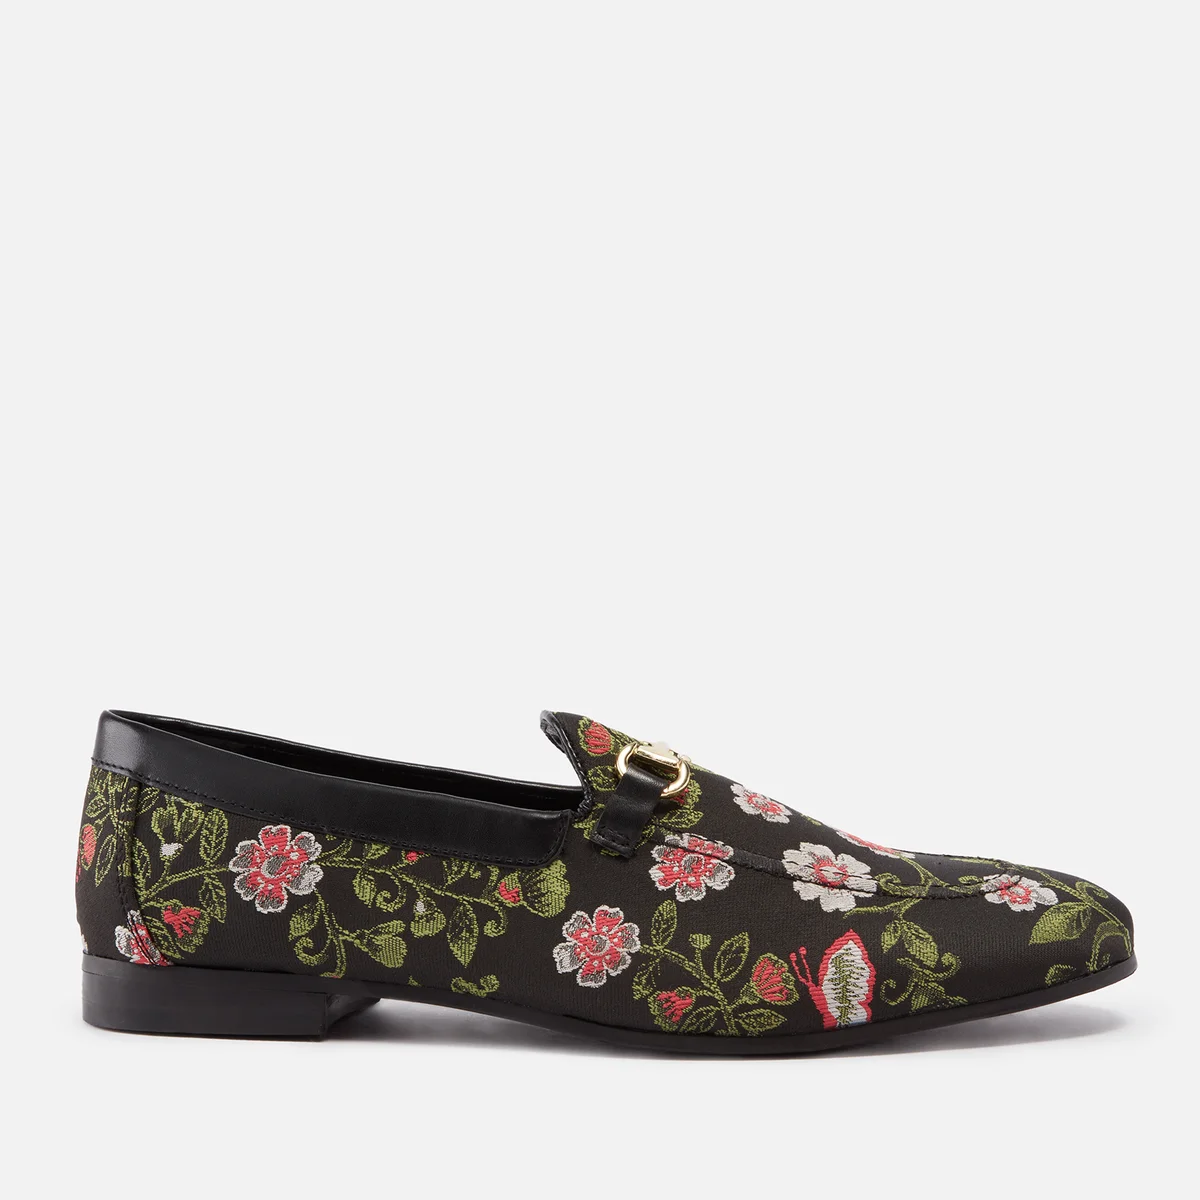 Walk London Joey Floral Canvas Loafers Image 1